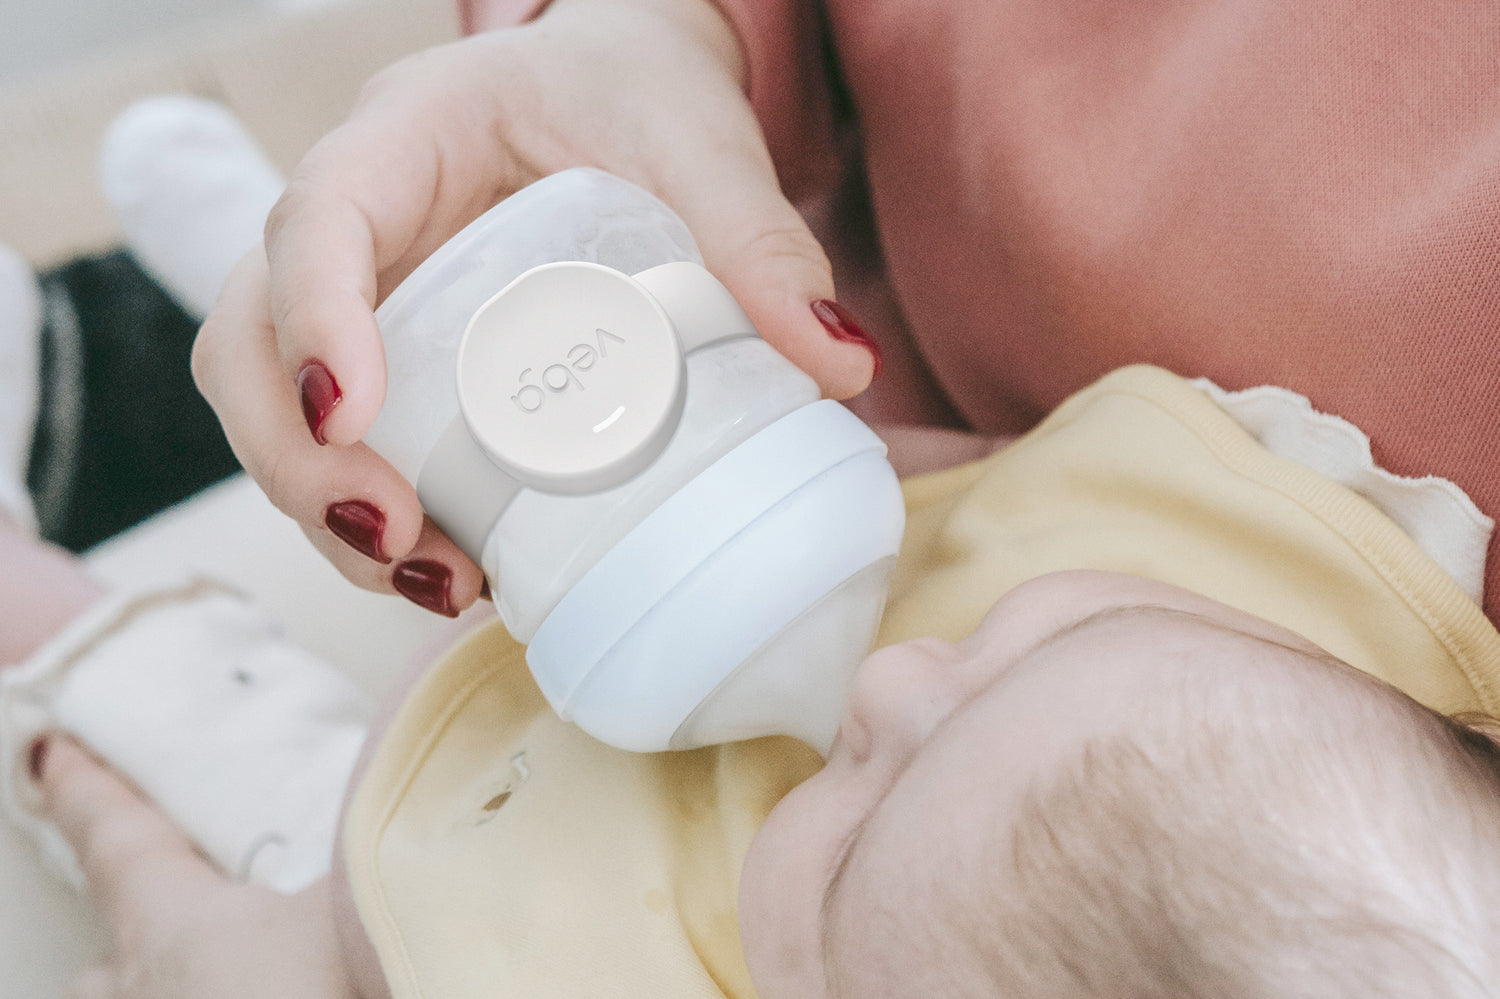 Image of Veba Baby Smart Bottle Monitor with Young Newborn Baby.